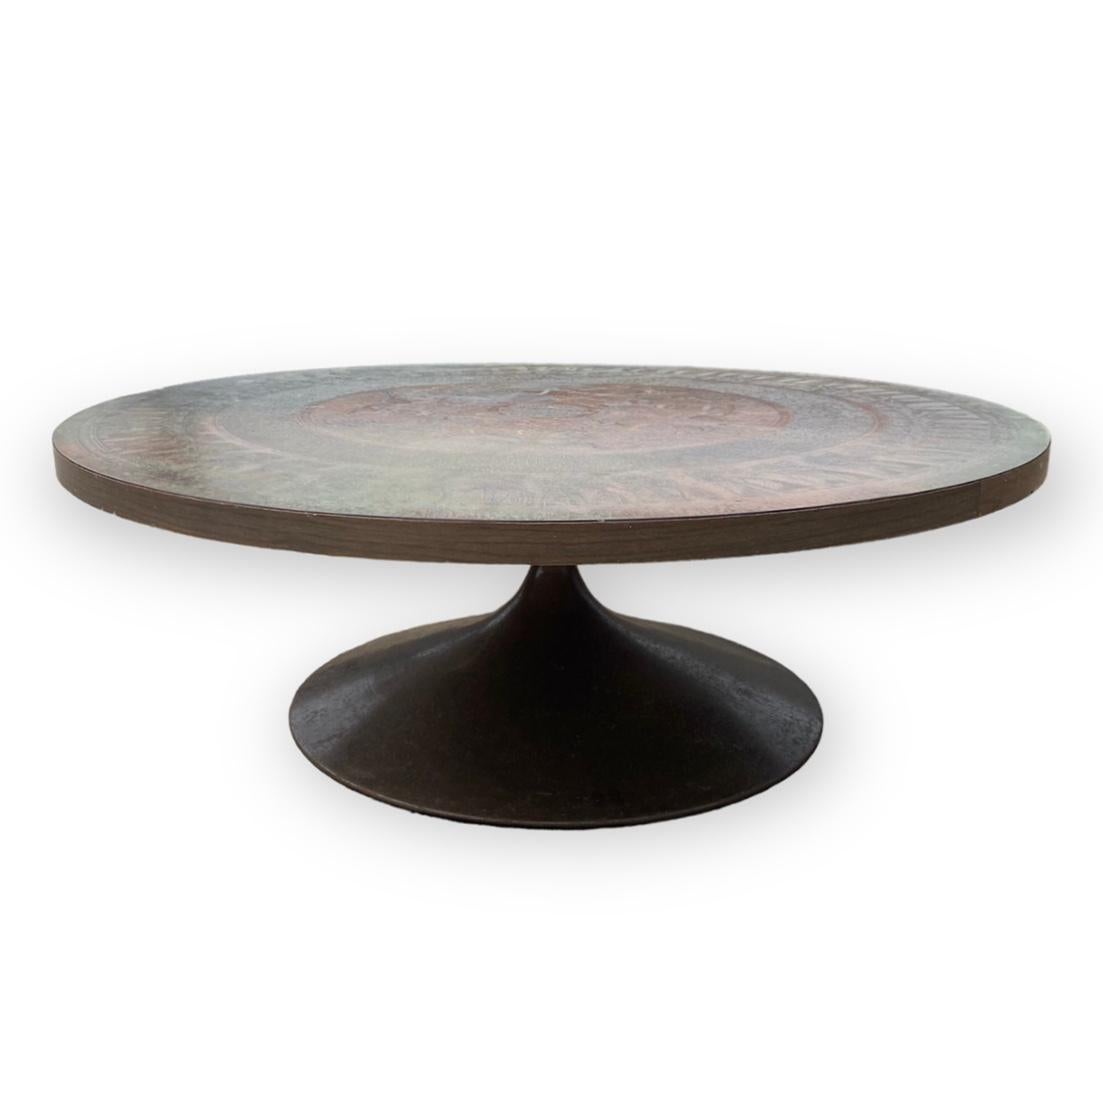 Vad Trevarefabrikk, Norwegian circular copper topped coffee table, with the ancient Egyptian style motif on a circular wine glass style metal base, with angle steel sub-frame, circa 1970

Condition Report

Slight discolouration area of verdigre